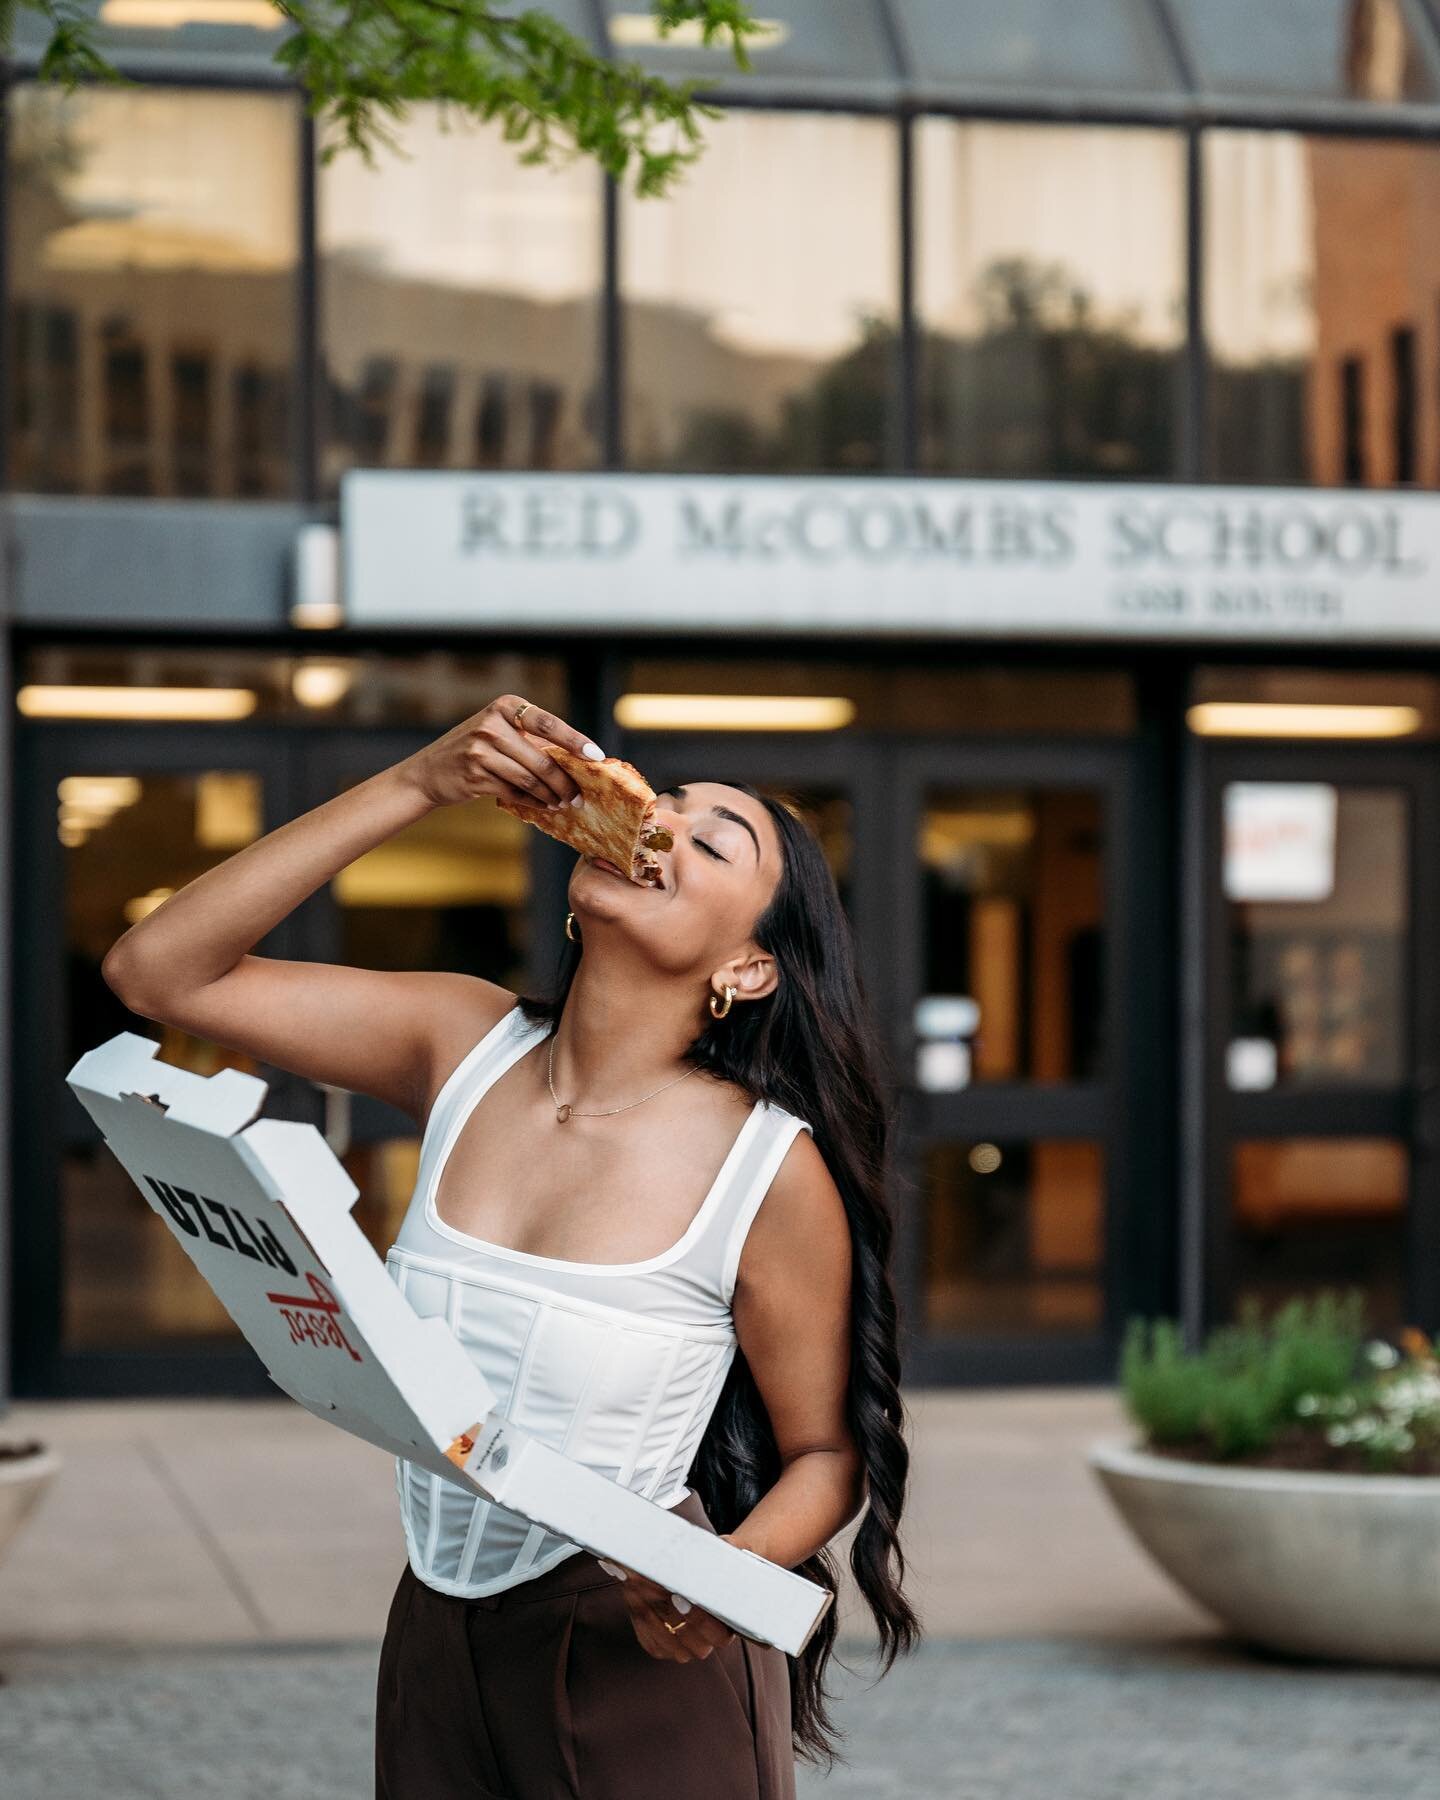 Going through some of my past work and realized that y&rsquo;all&rsquo;s feeds have not been blessed with @meganaj_&rsquo;s senior photos 💕

#utaustin #austinphotographer #atxphotographer #universityoftexas #seniorphotos #gradphotos #mccombsschoolof